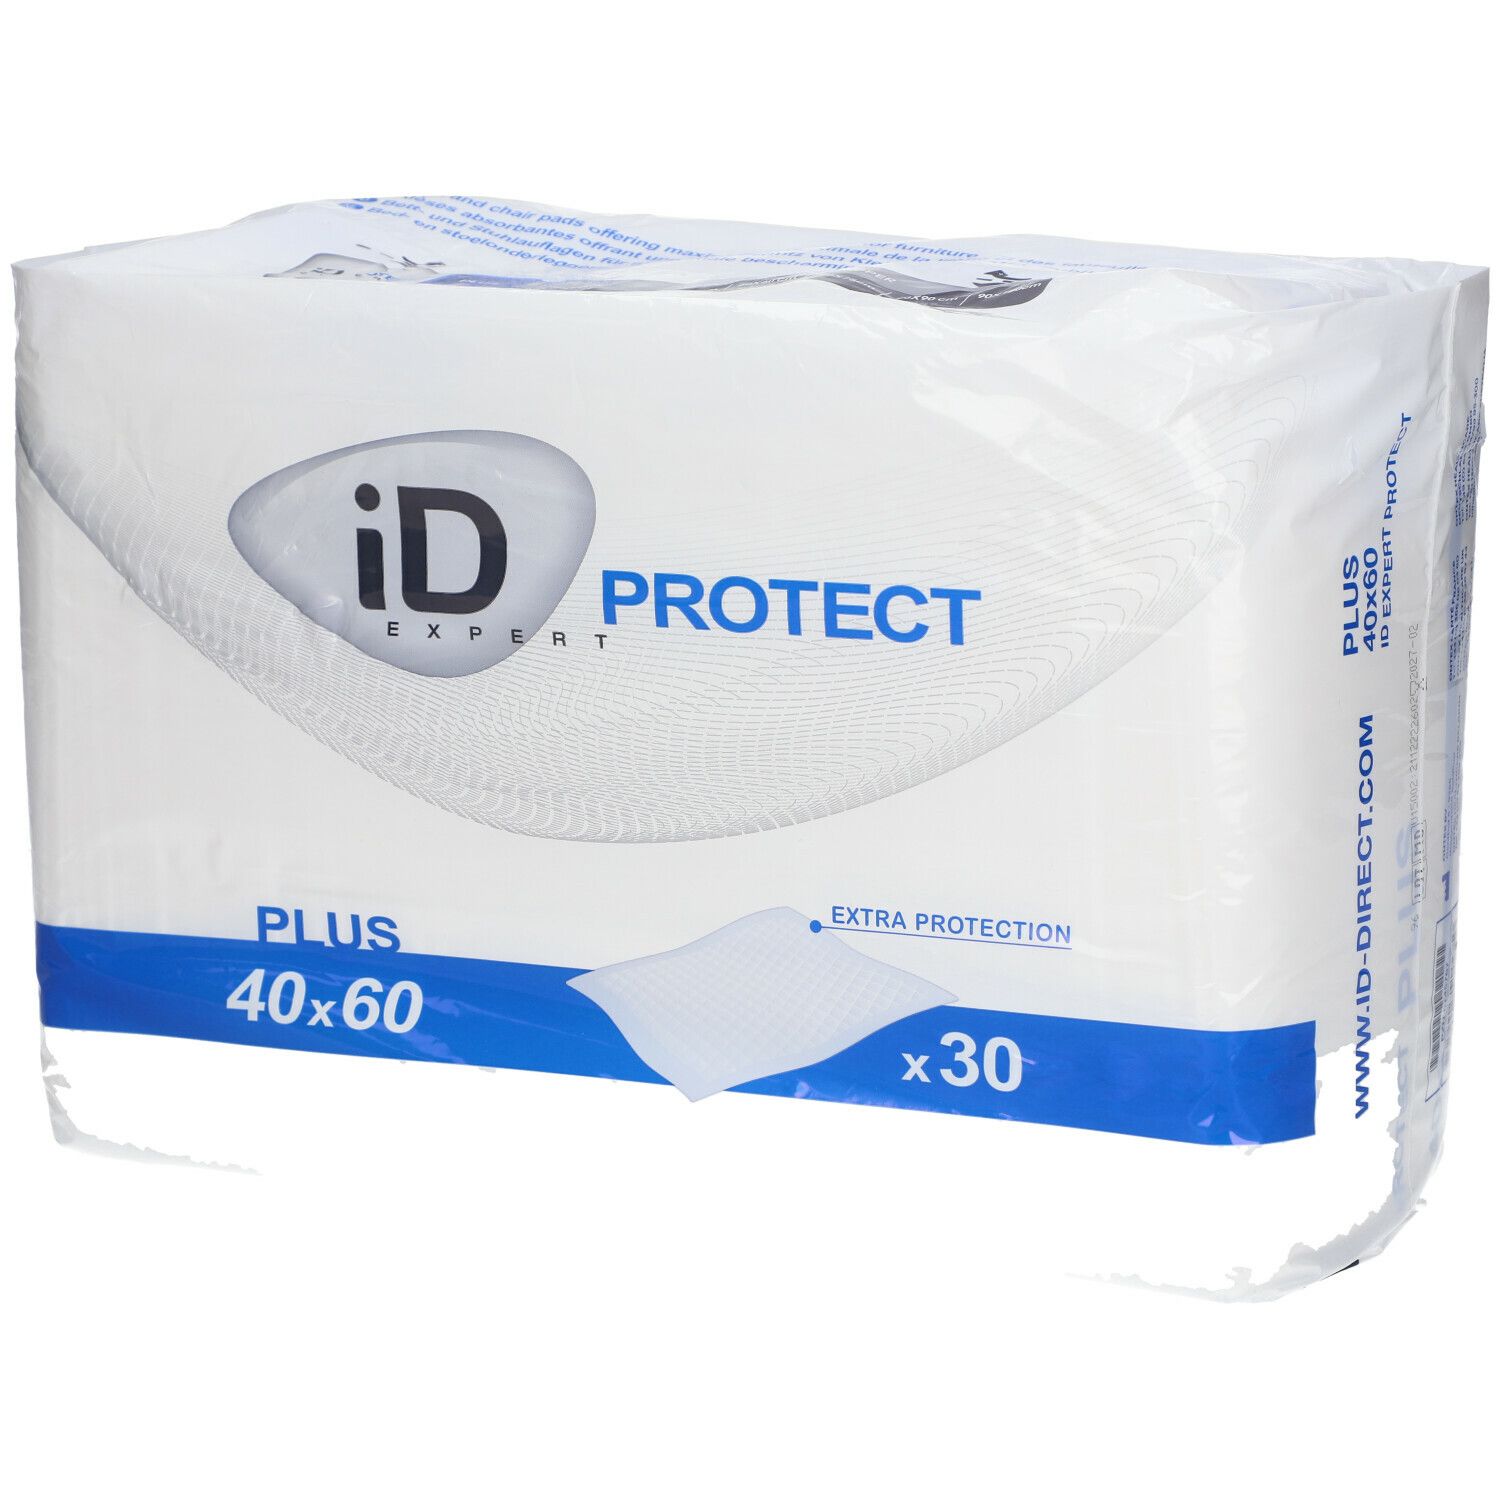 iD Expert Protect Plus 40 x 60